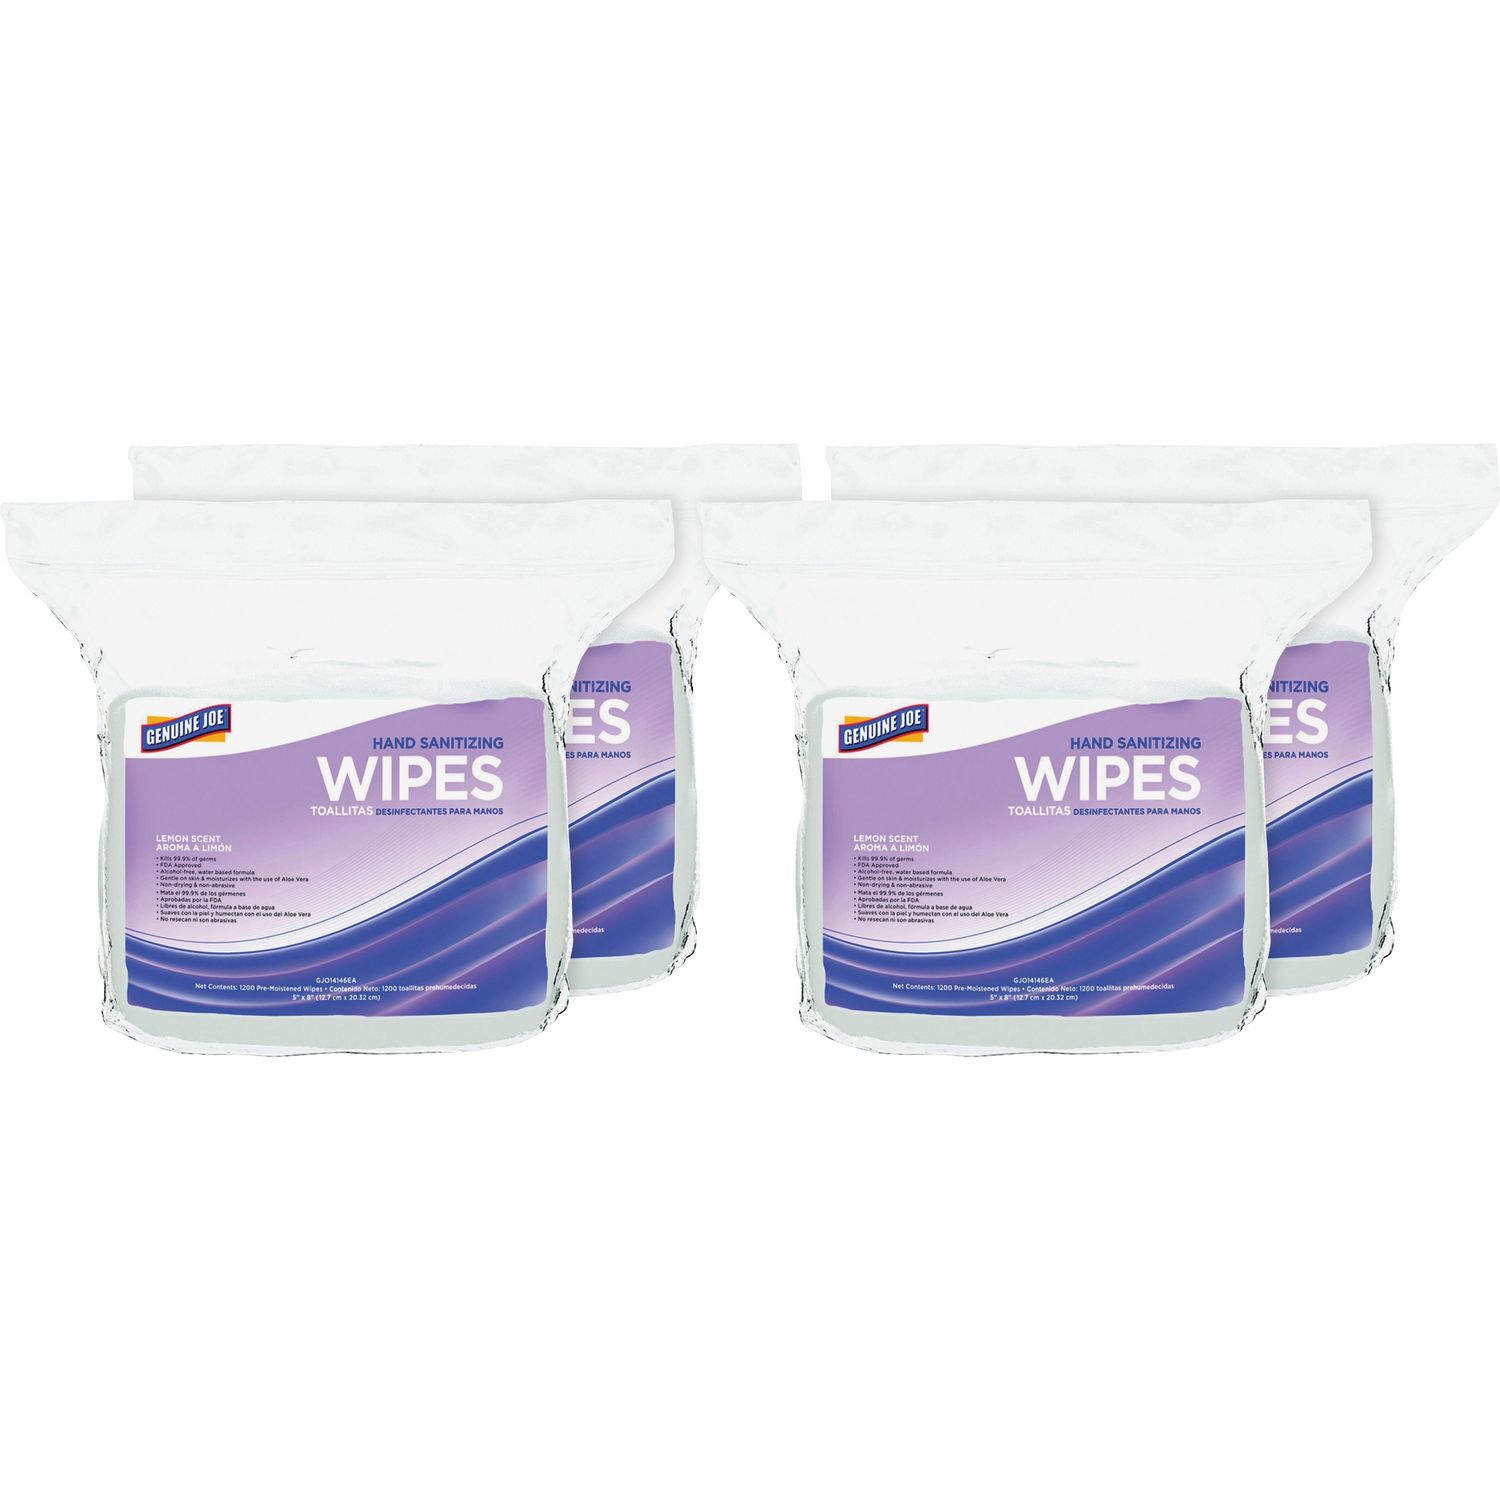 Alcohol-free Hand Sanitizing Wipes 7" x 6", White, Alcohol-free, Lint-free, Non-abrasive, For Hand, 1200 Per Bag, 4 / Carton